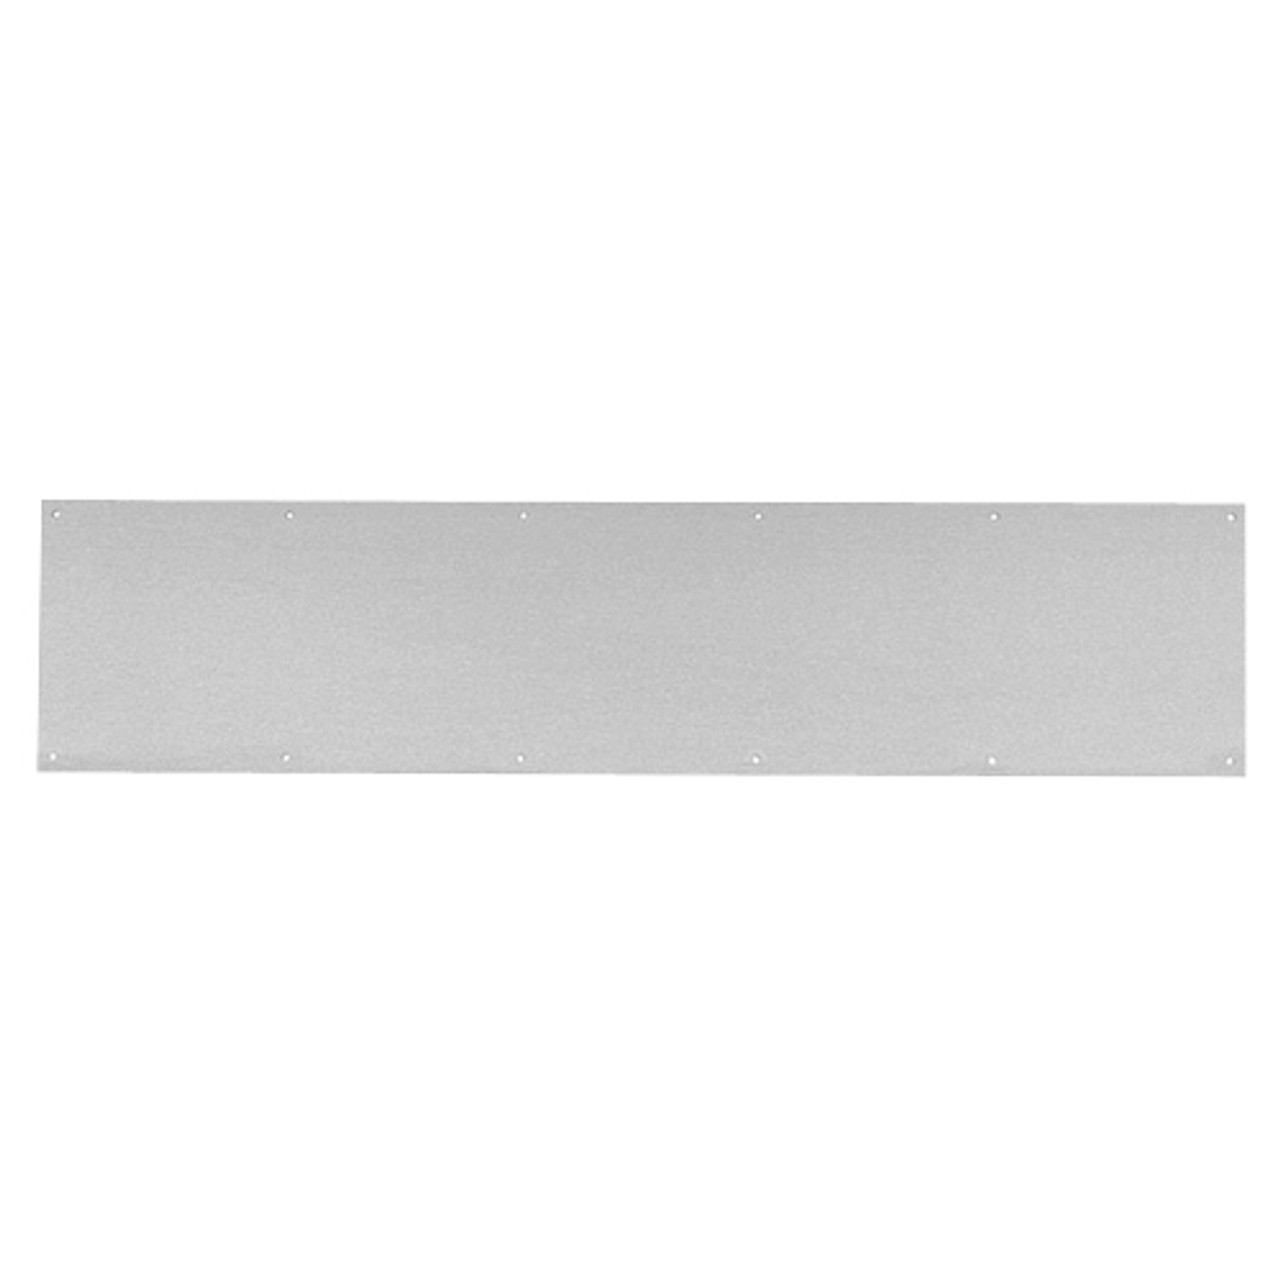 8400-US26D-10x34-B-CS Ives 8400 Series Protection Plate in Satin Chrome